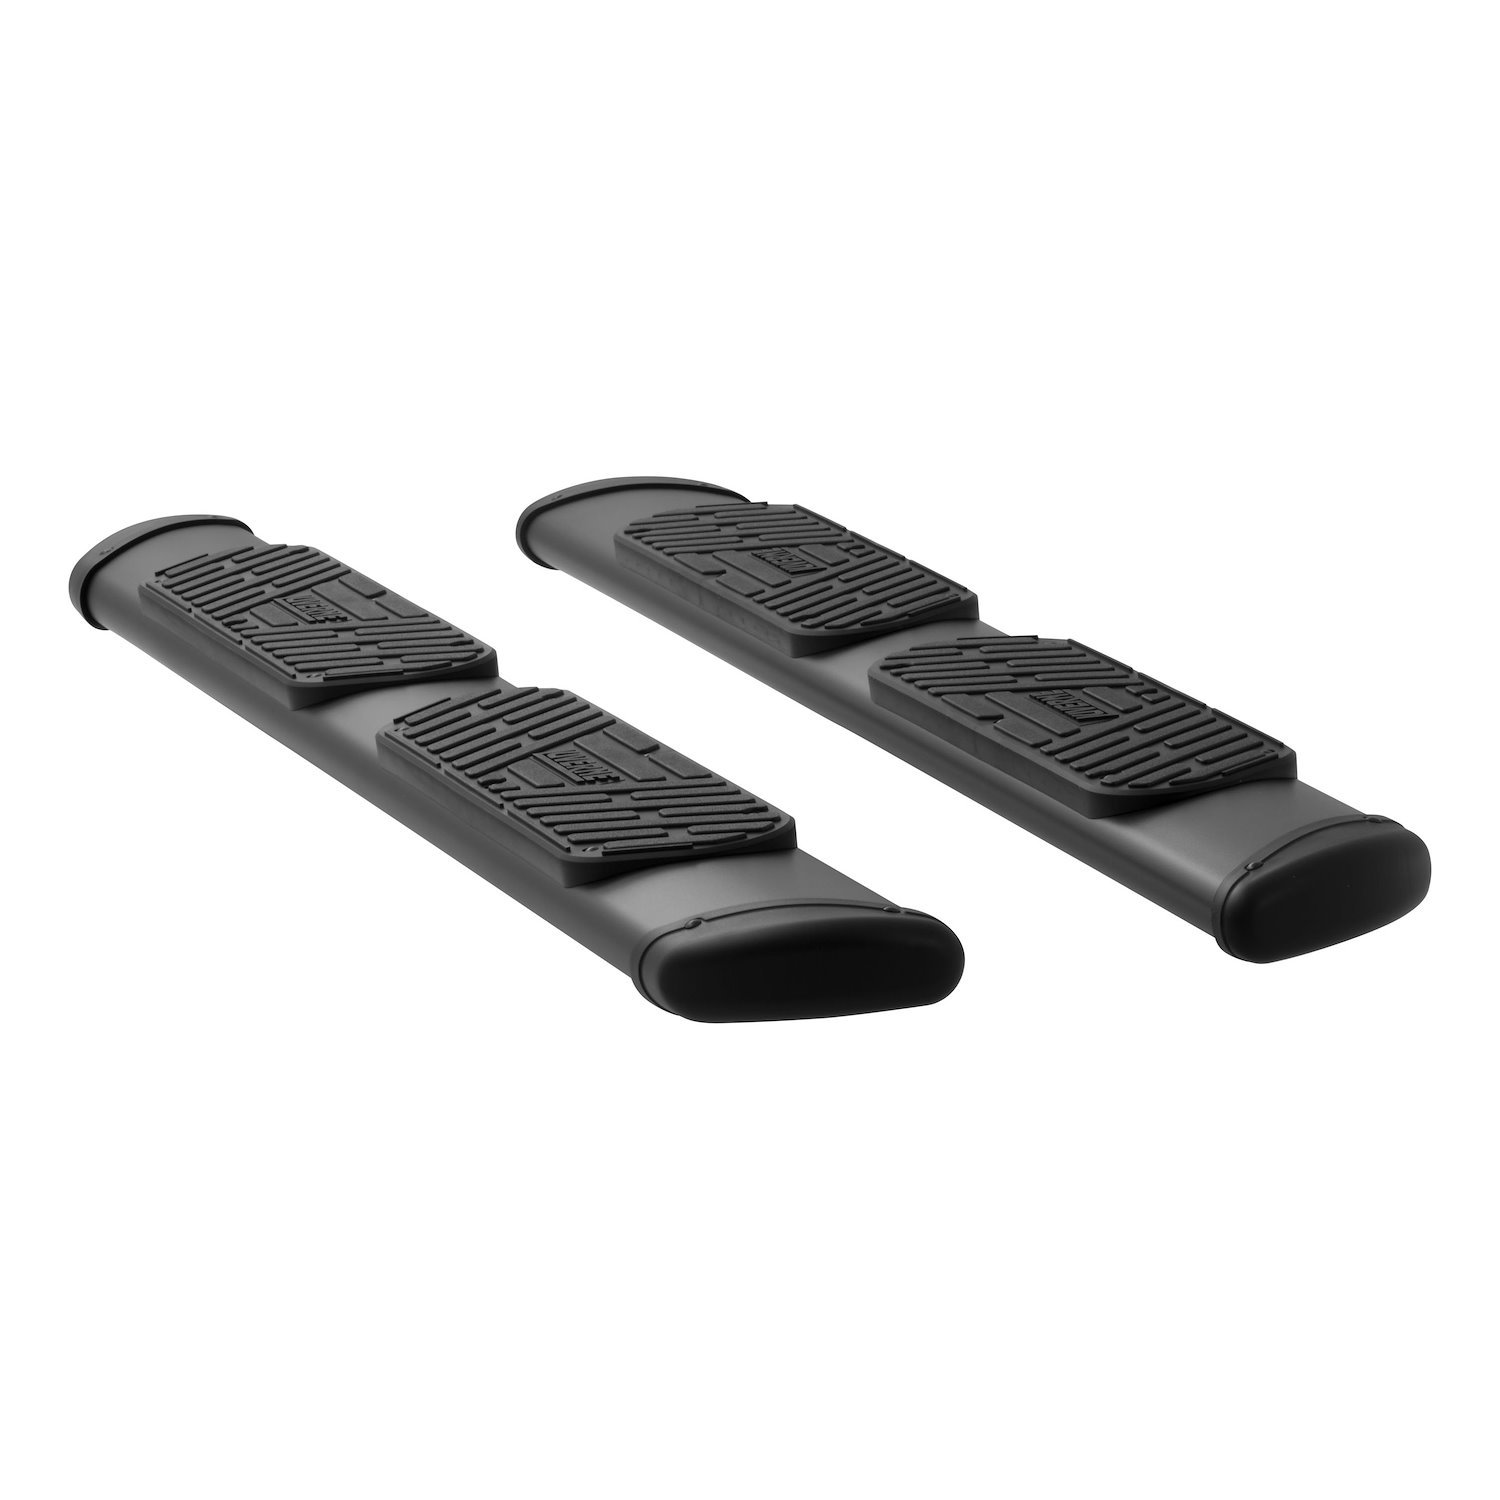 277078-401113 Regal 7 Black Stainless 78 in. Oval Side Steps Fits Select Chevy Silverado, GMC Sierra